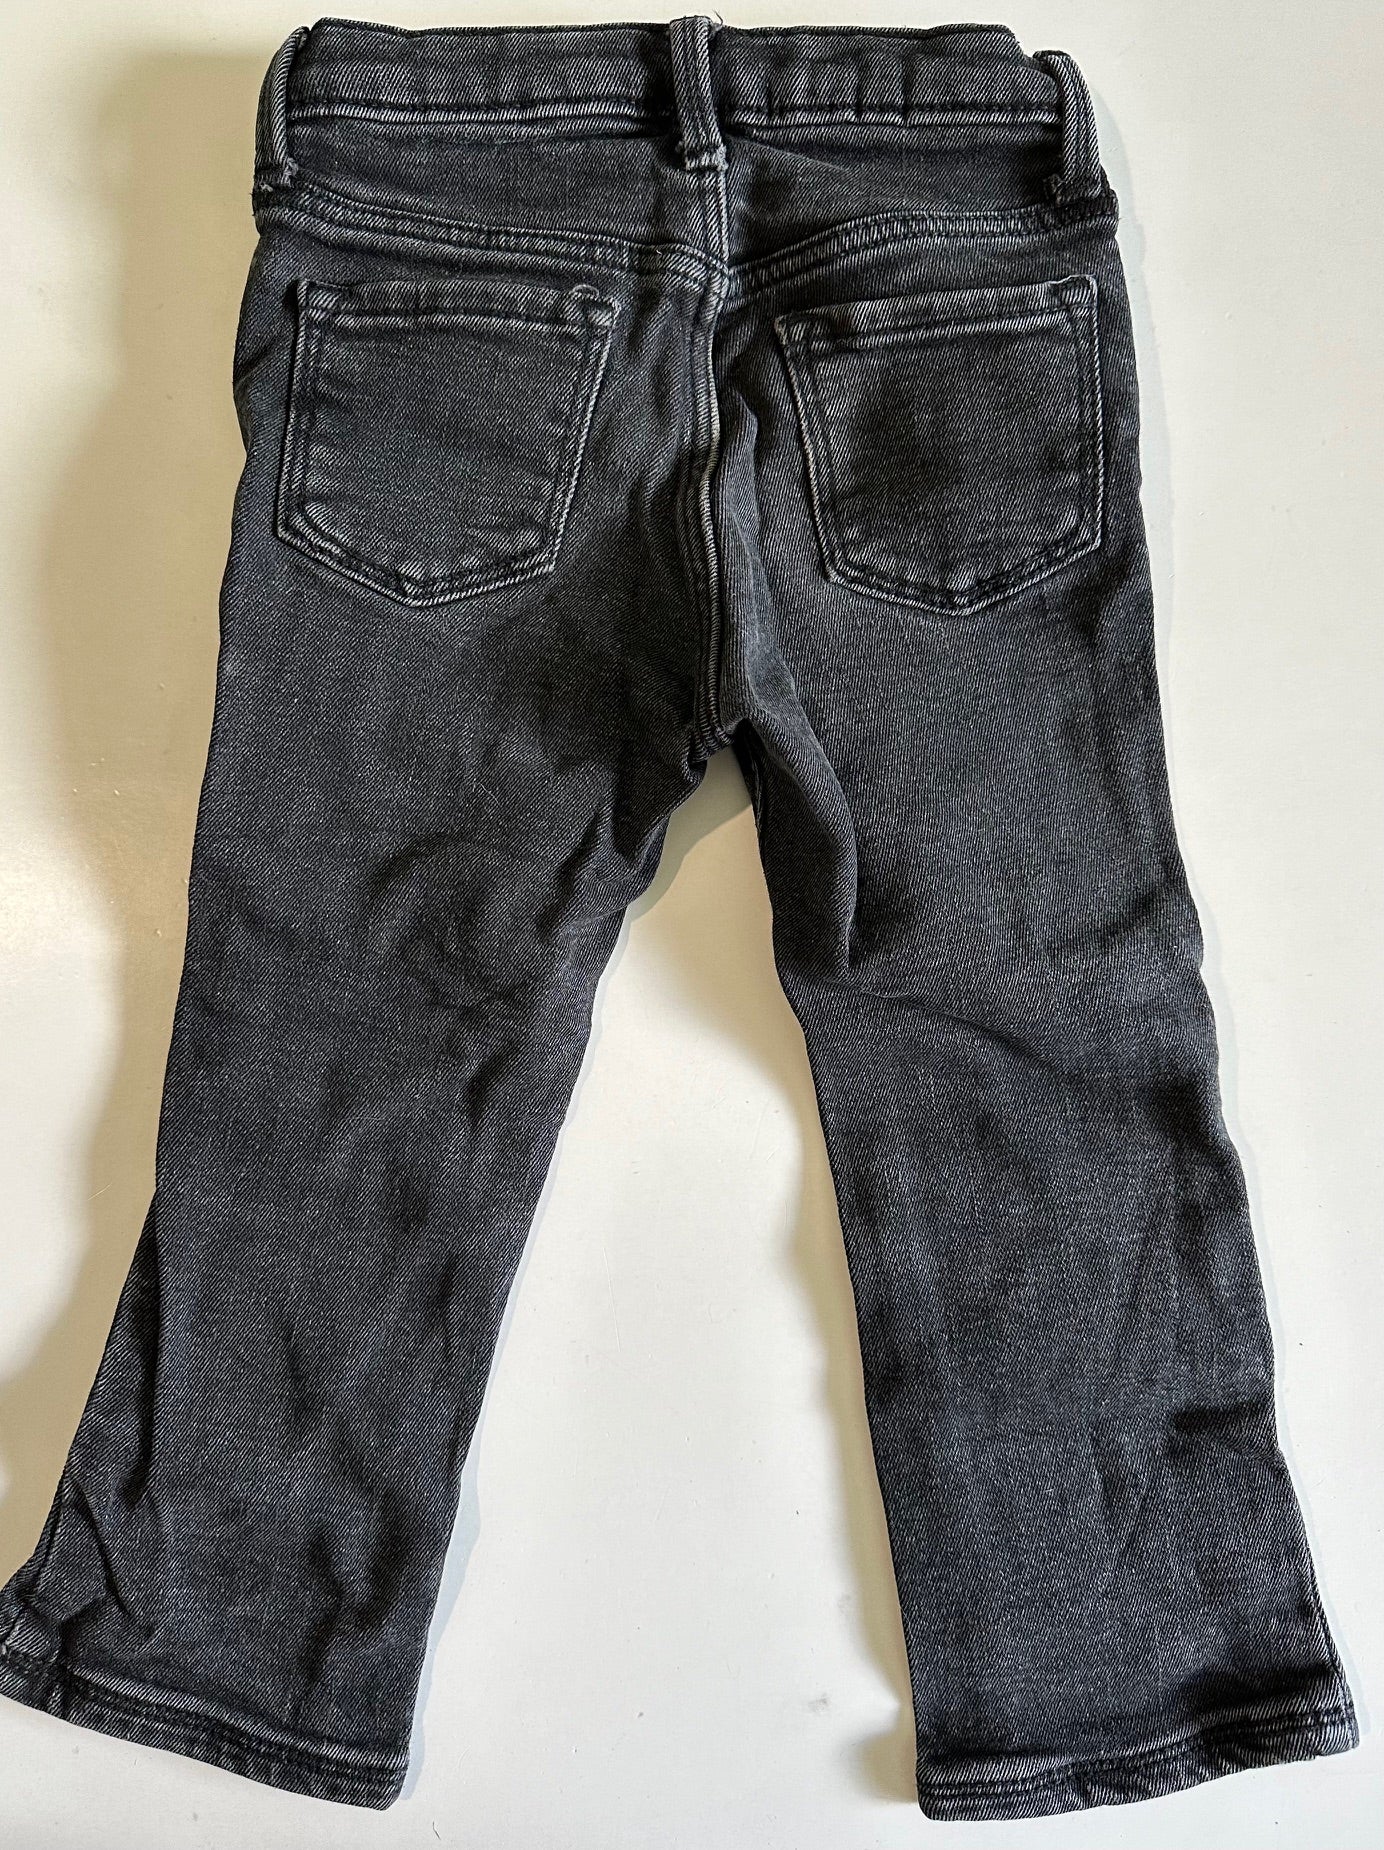 Old Navy, Black Jeans with Adjustable Waist - Size 3T